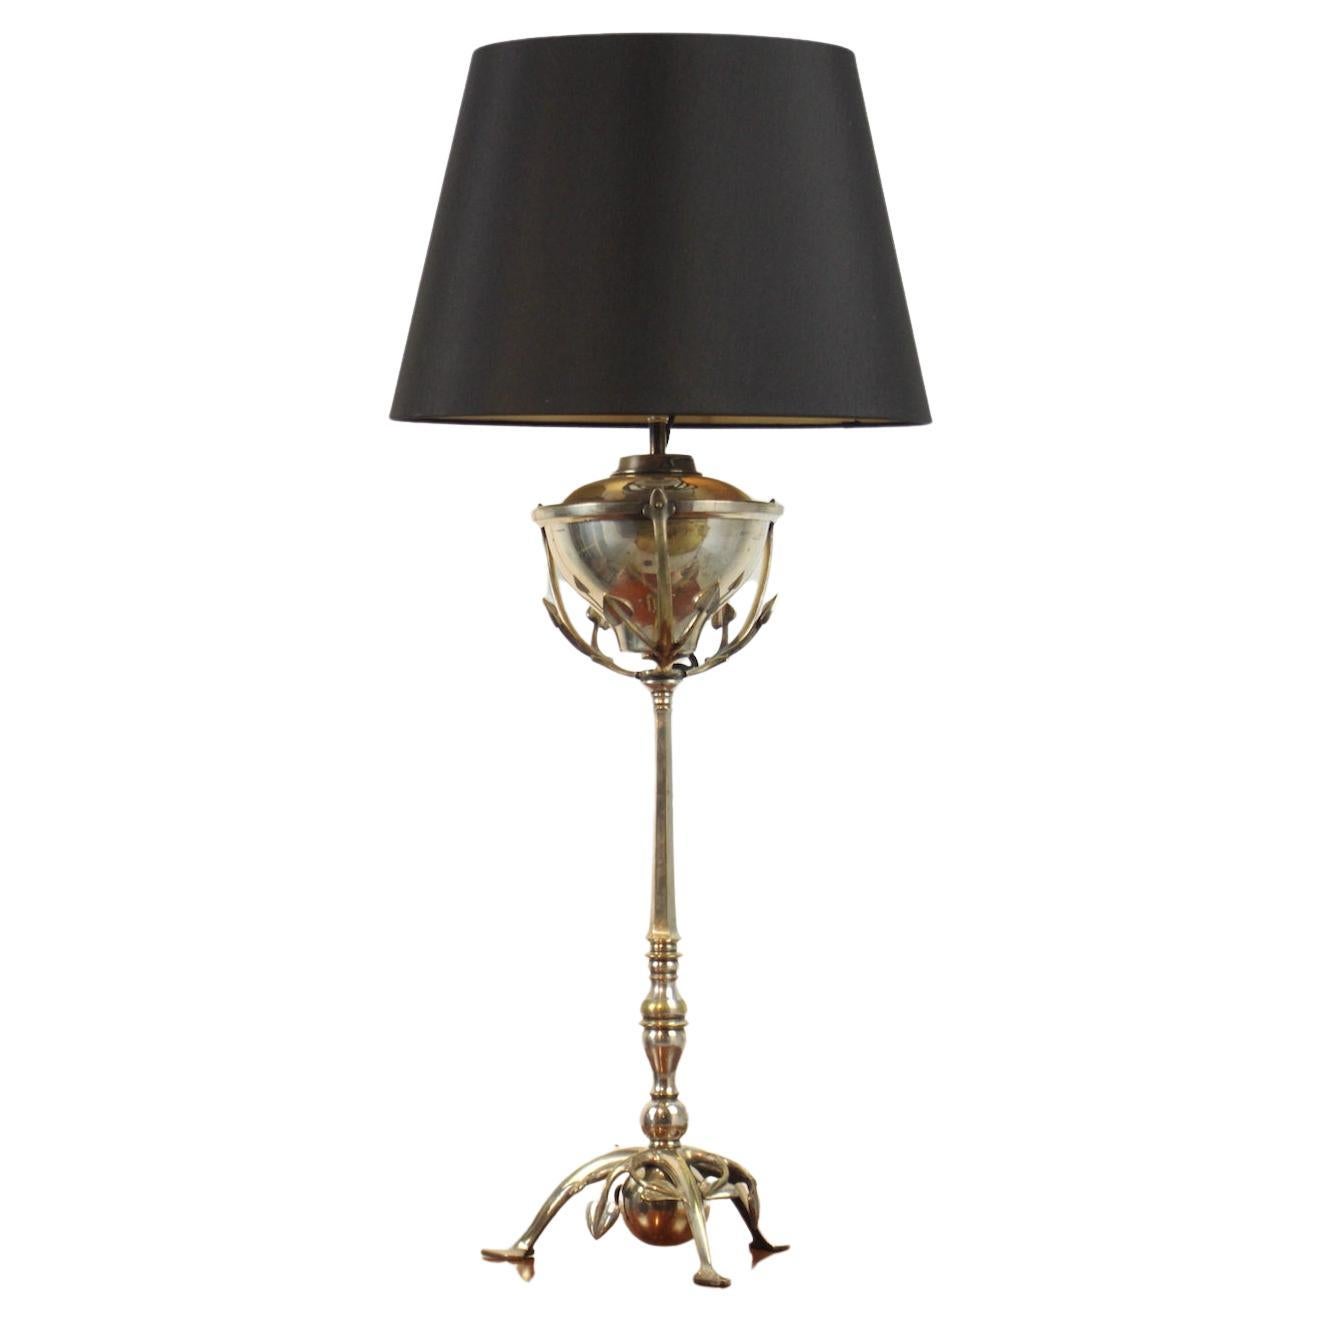 Arts & Crafts Table Lamp by W.A.S. Benson